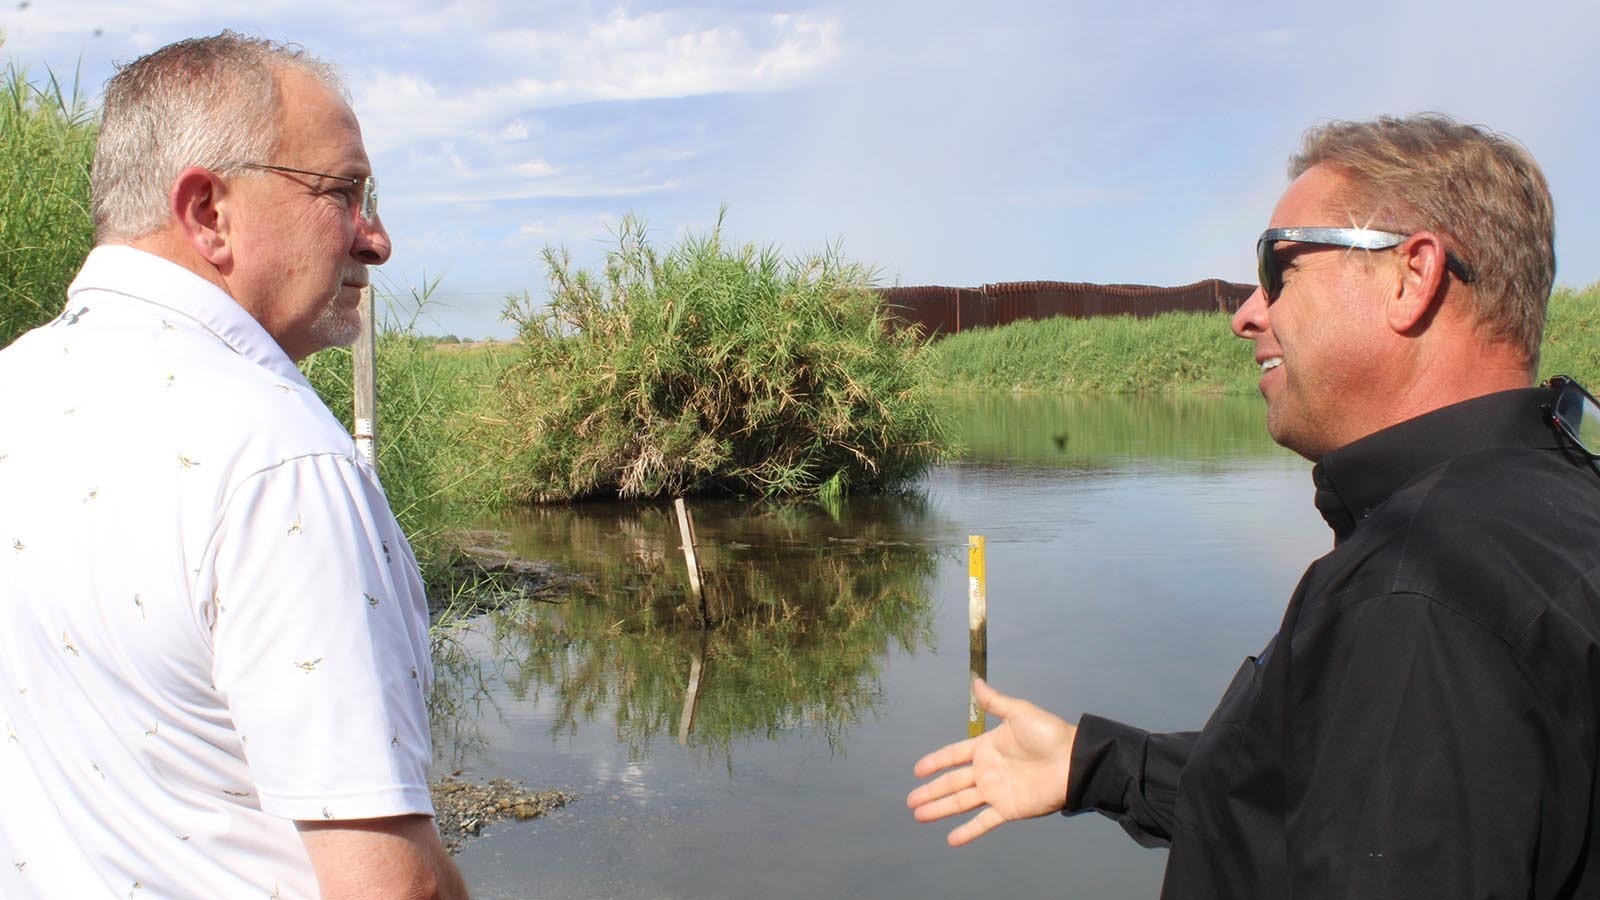 Yuma County Supervisor Jonathan Lines, right, explains to state Rep. Jon Conrad, R-Mountain View, how people can more easily cross from Mexico on the left side of the wall in the background, over to California on the right, rather than travel across the Colorado River to Arizona where they stand.